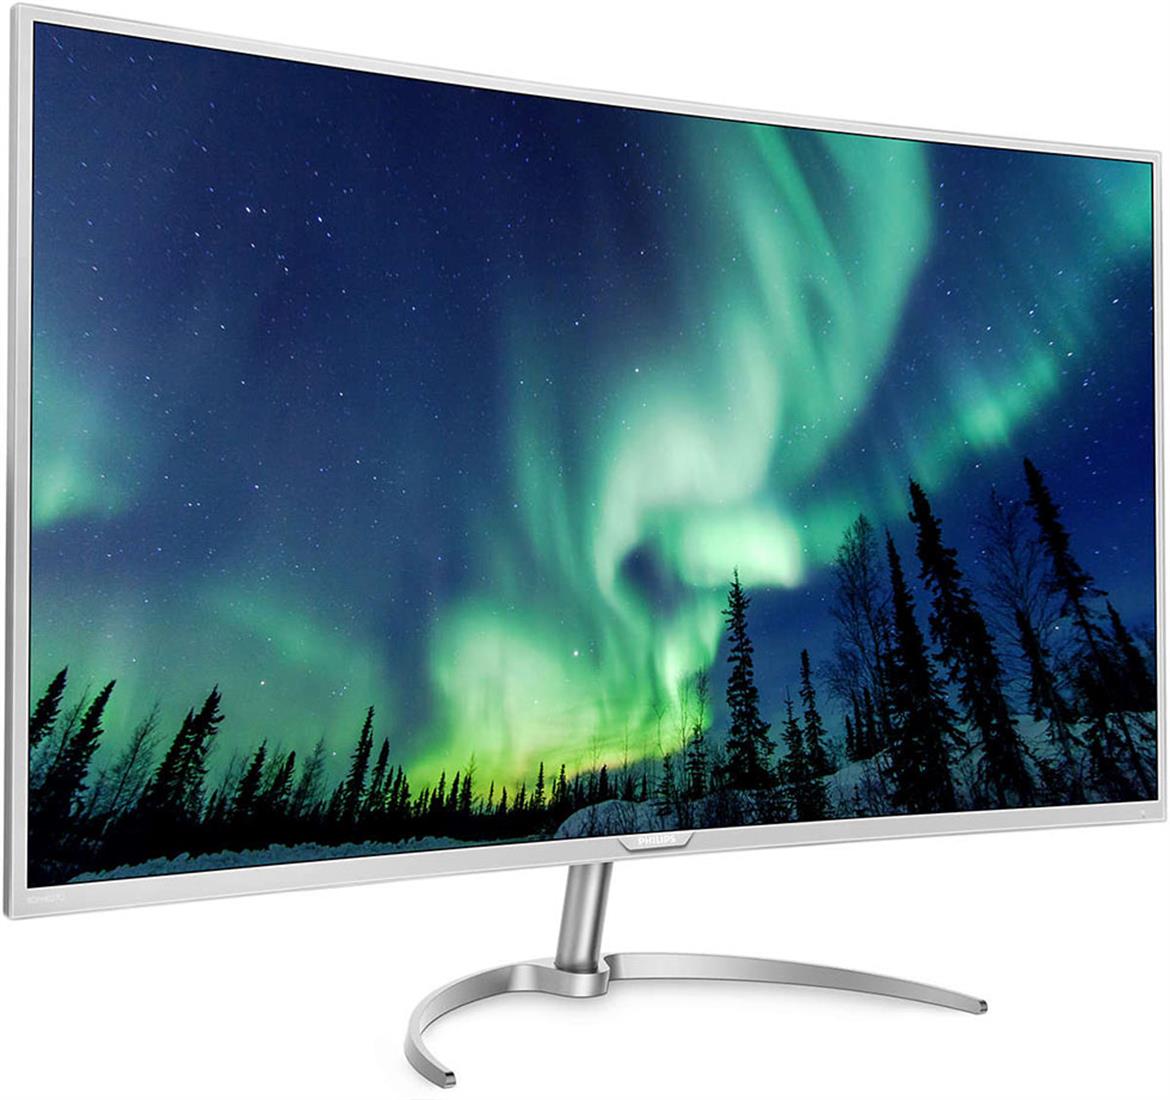 Philips' 40-Inch Brilliance 4K UHD Curved Monitor Is Certifiably Hot Productivity Goodness